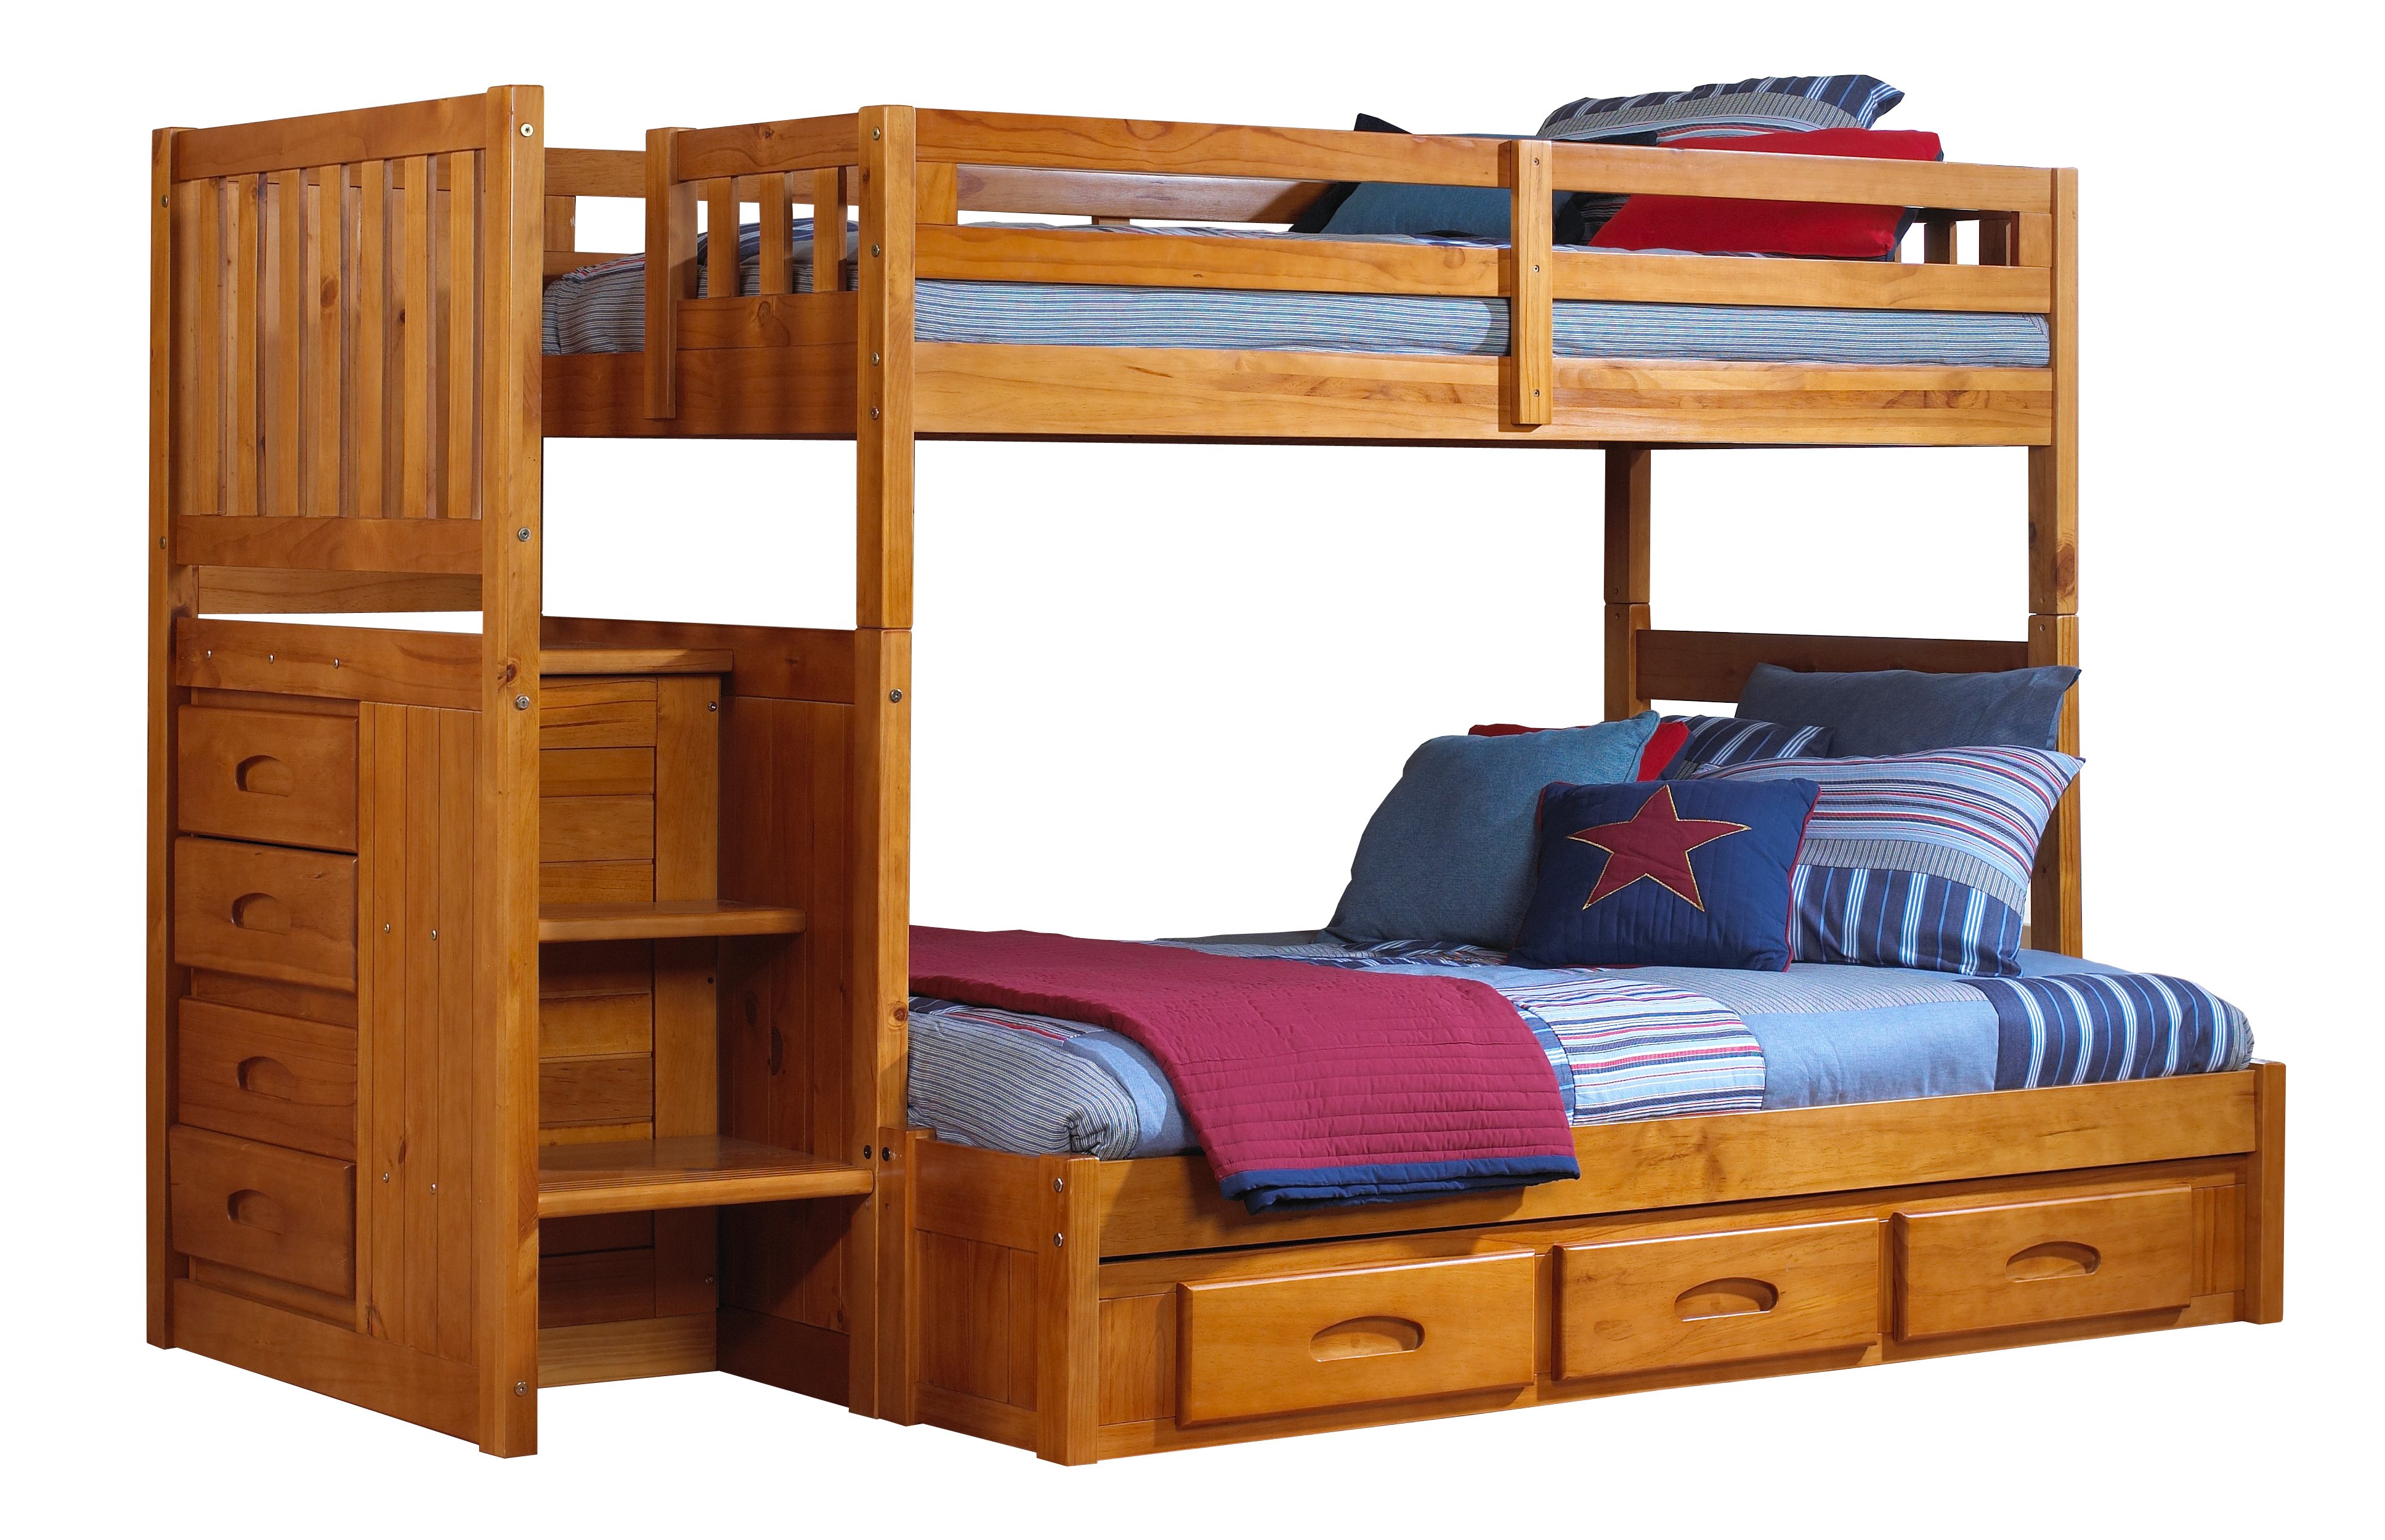 Honey Staircase Bunk Bed, We Furniture Twin Over Twin Solid Wood Bunk Bed Natural